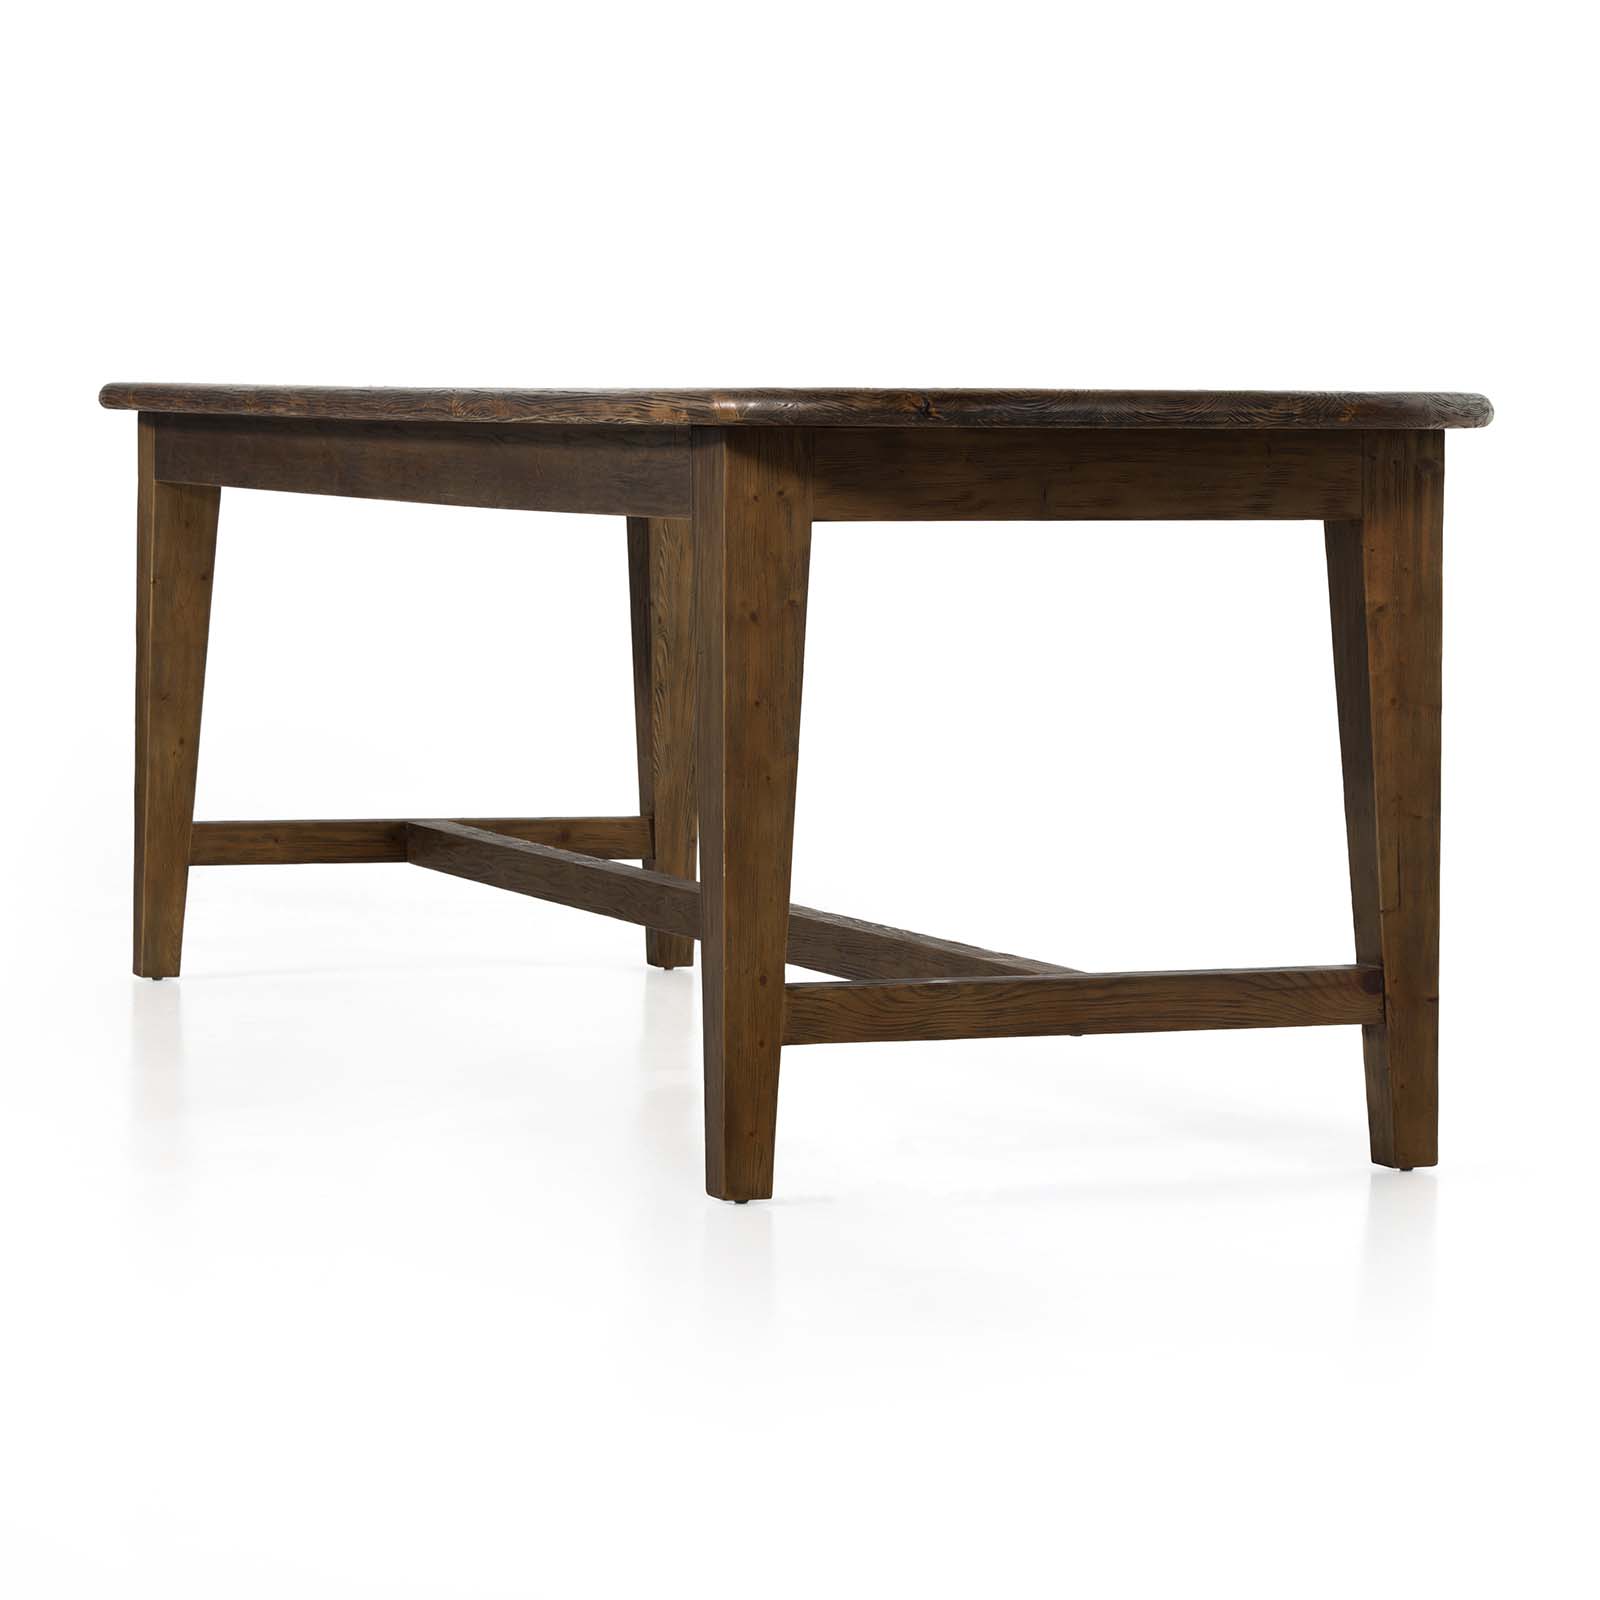 Creed 110" Dining Table